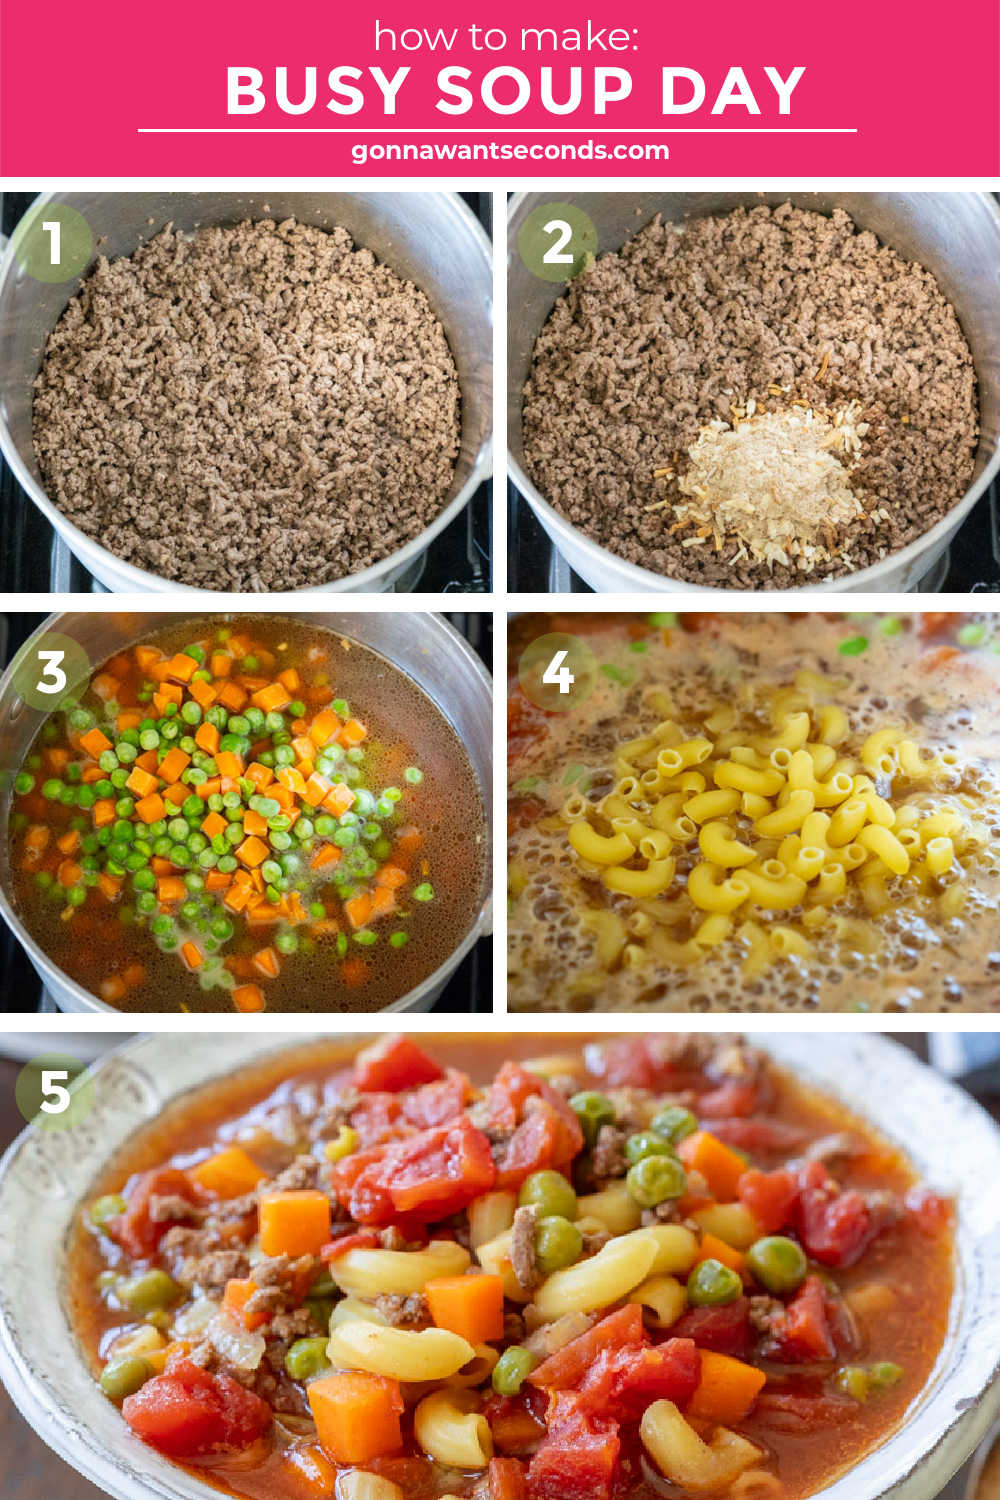 Step by step how to make busy day soup